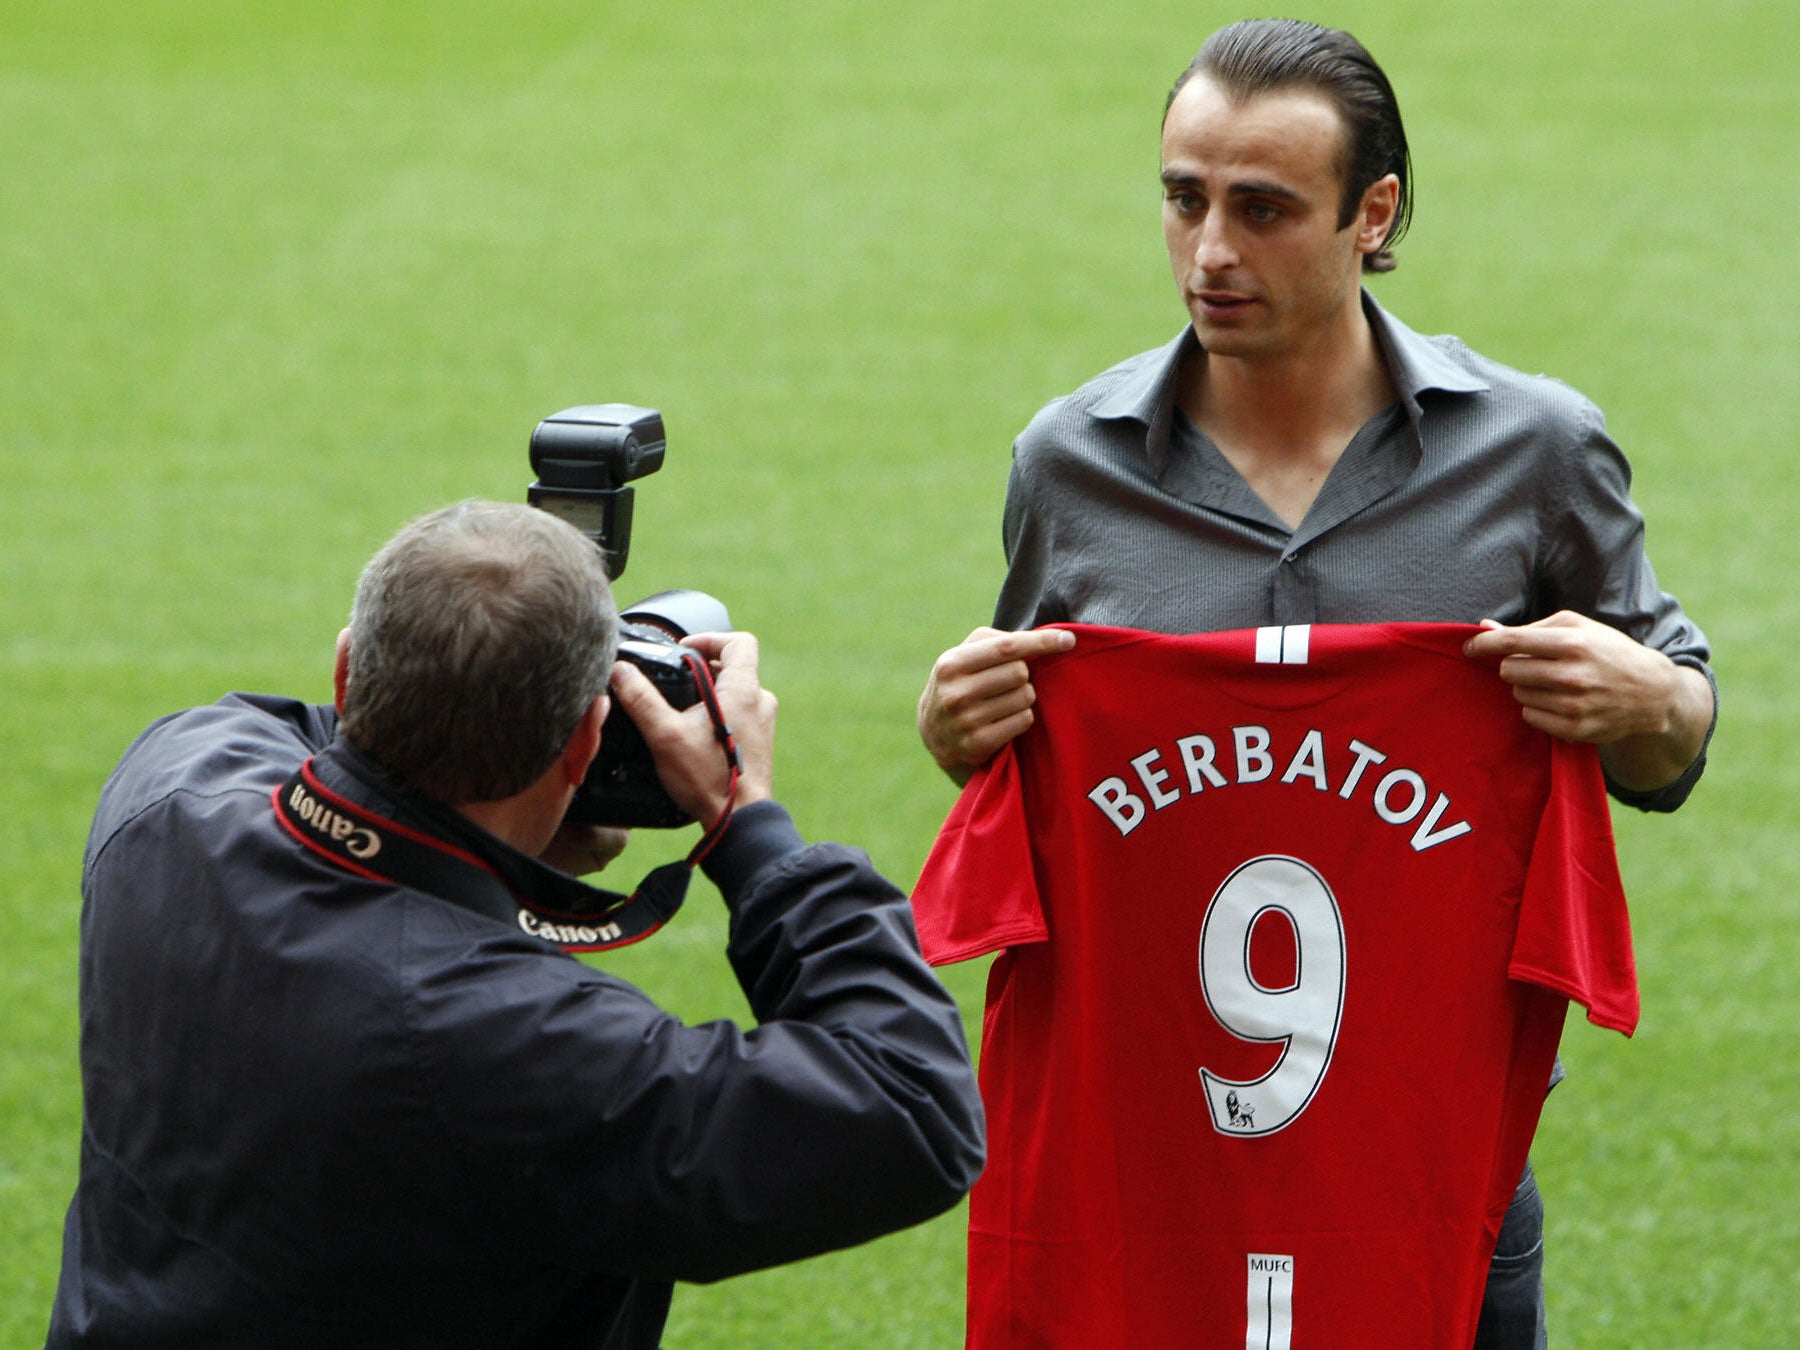 Dimitar Berbatov became Manchester United's record signing in 2008